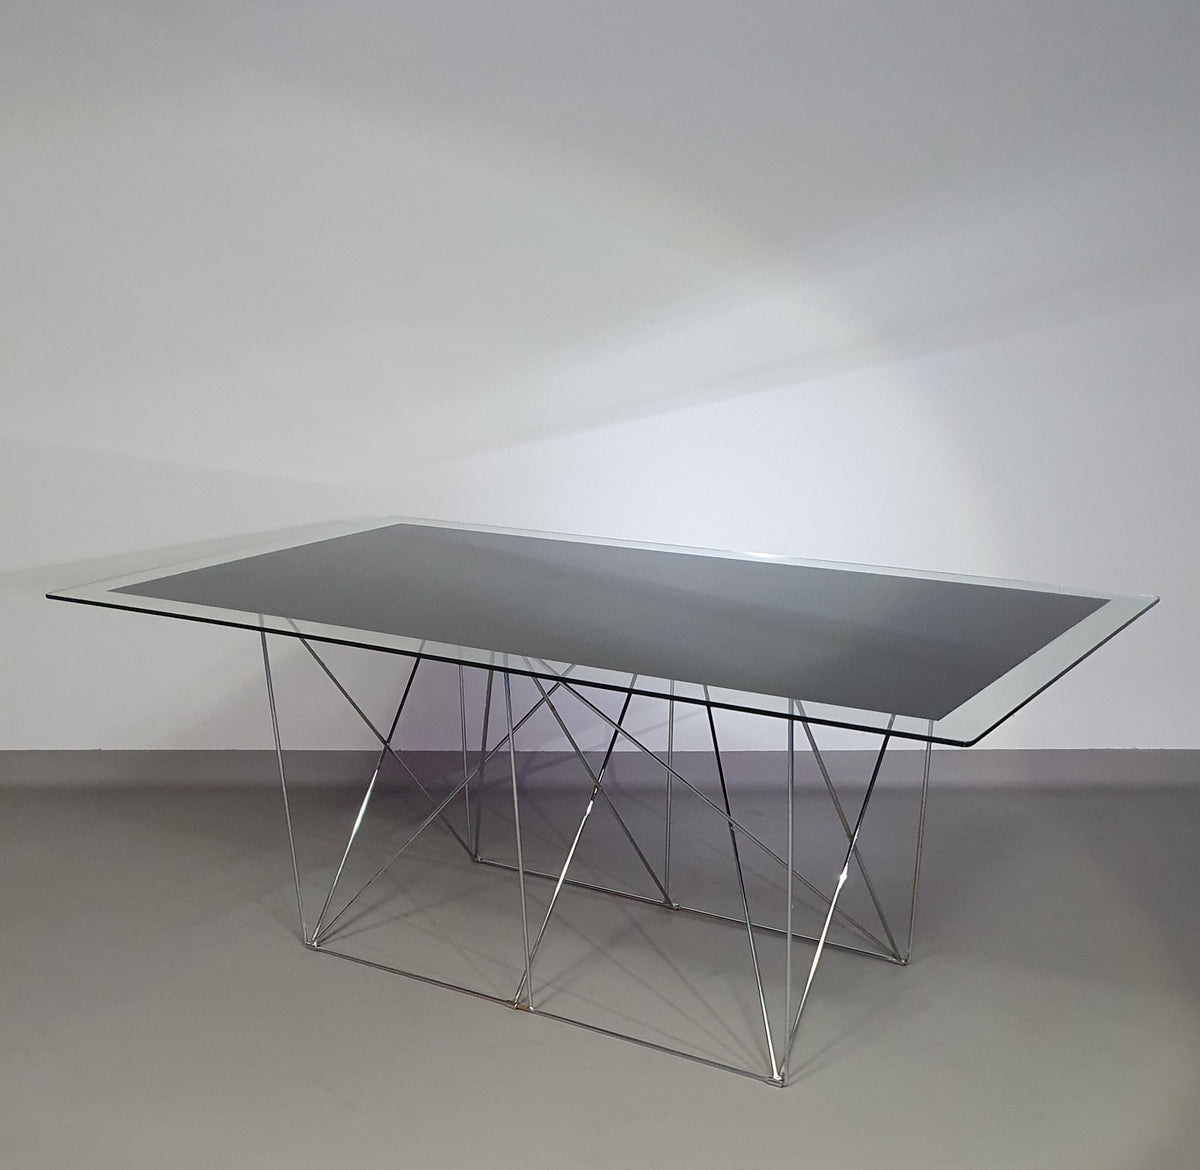 Steel and Glass Dining Table by Max Sauze for Max Sauze Studio, 1970s